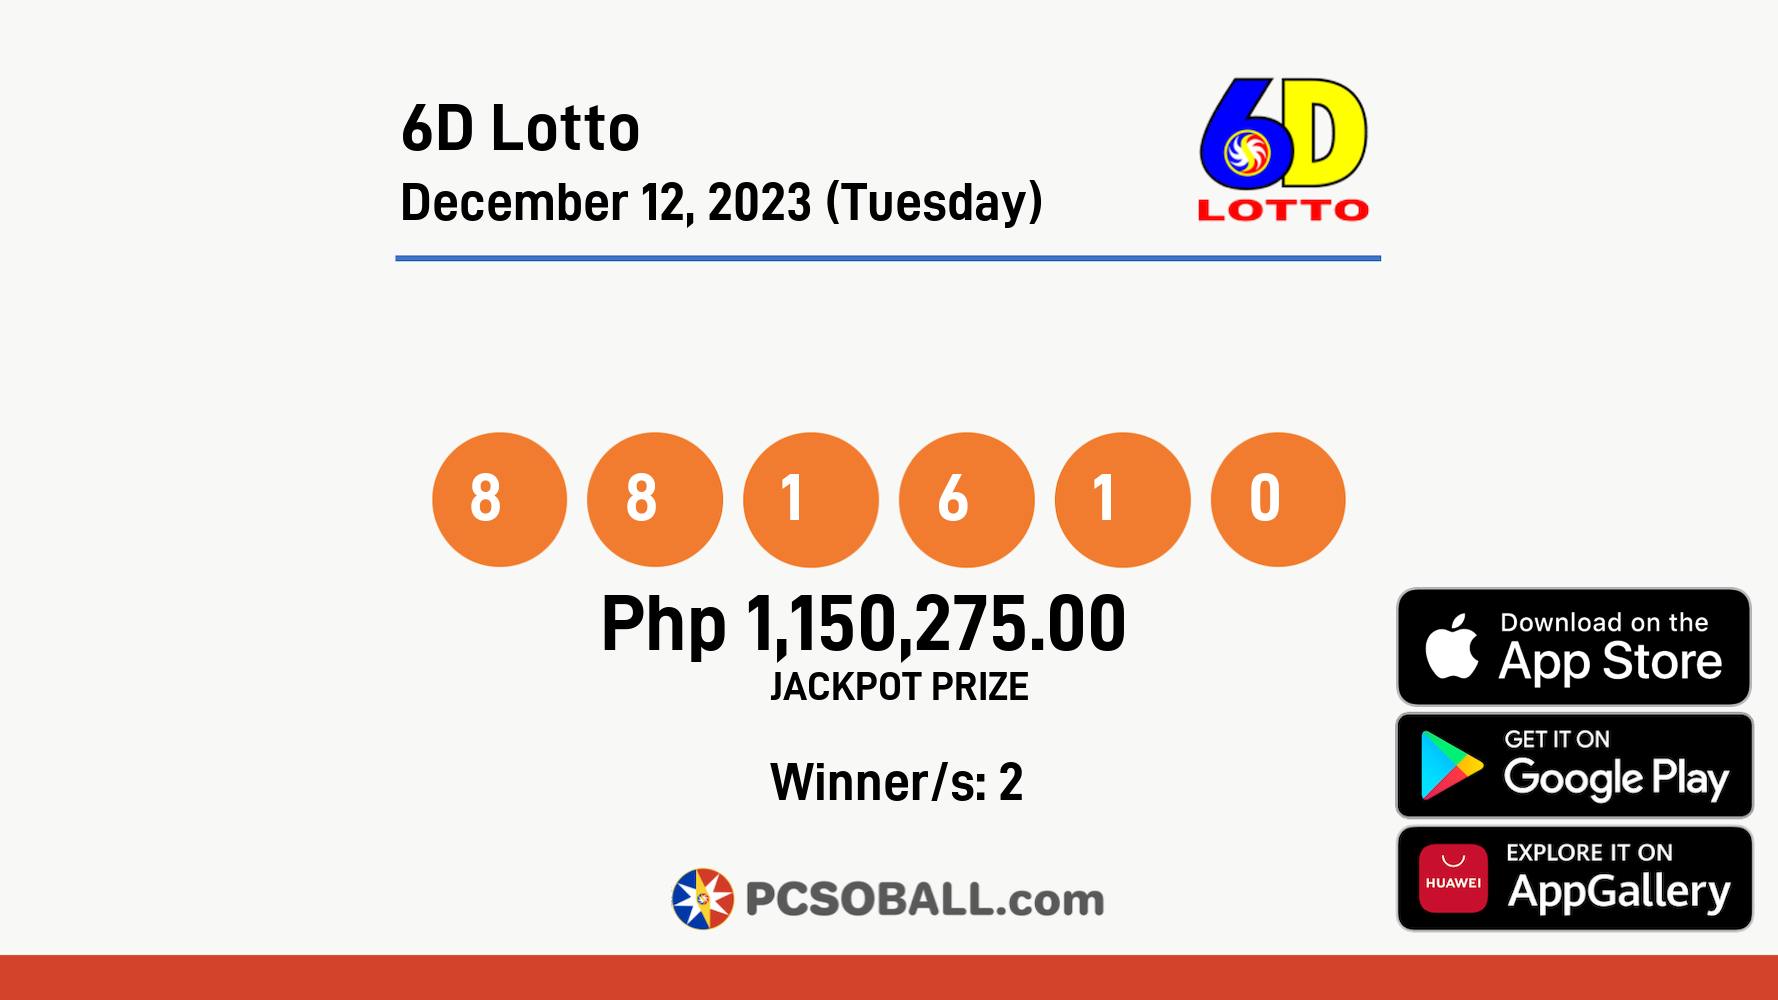 6D Lotto December 12, 2023 (Tuesday) Result